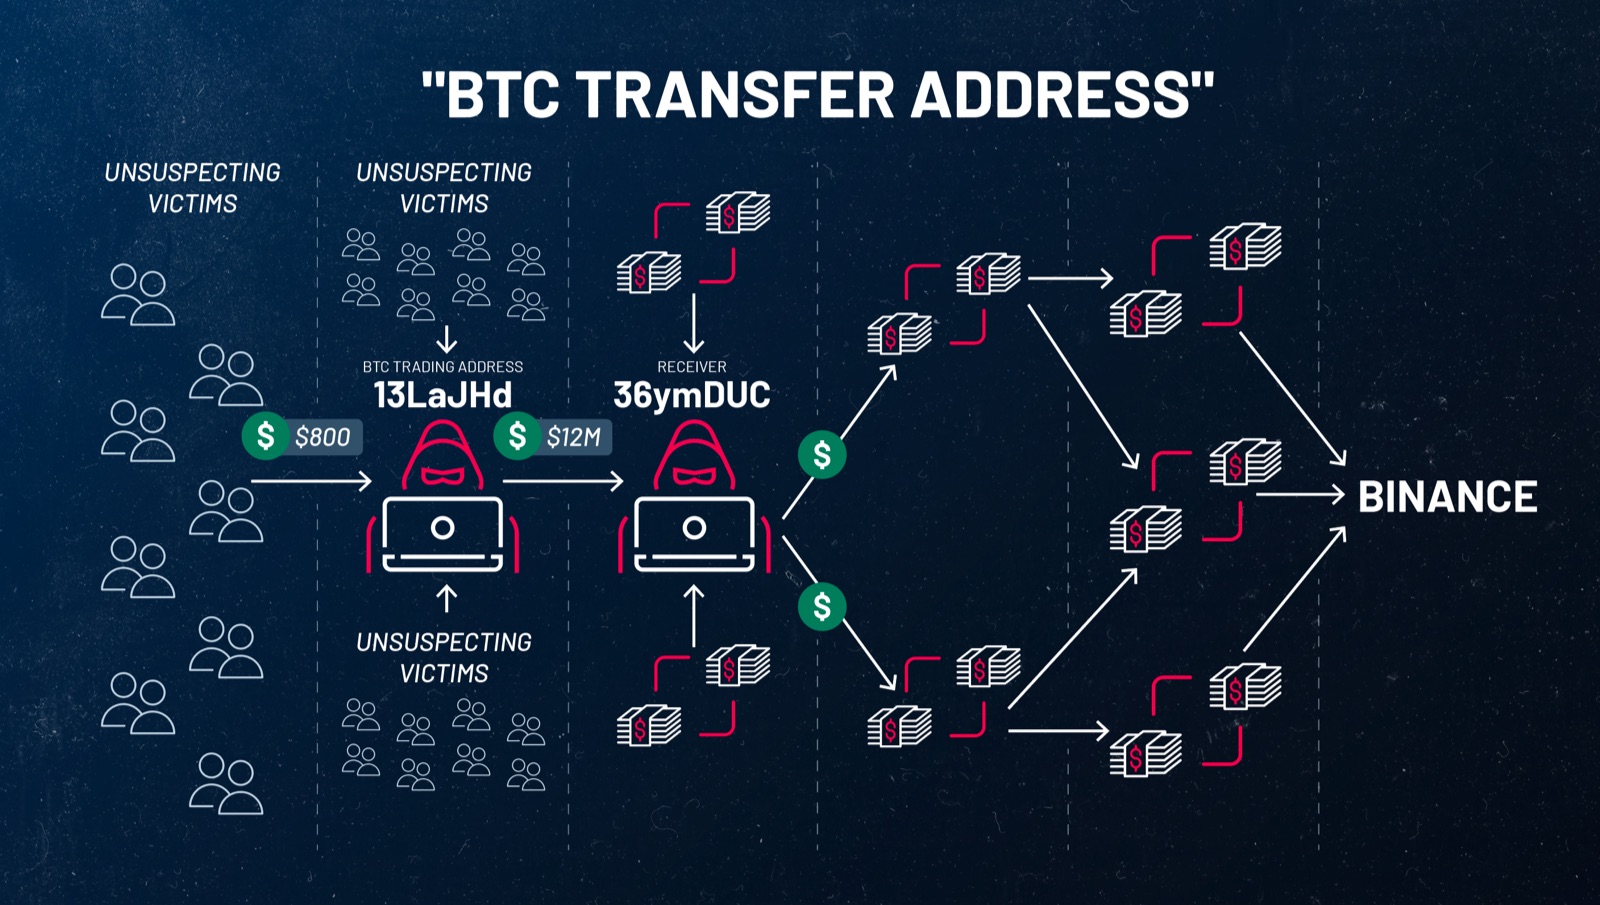 A diagram from Tenable showing how cryptocurrency is sent across various Bitcoin wallet addresses and ultimately lead to the Binance exchange, a popular destination for laundering stolen funds from pig butchering scams